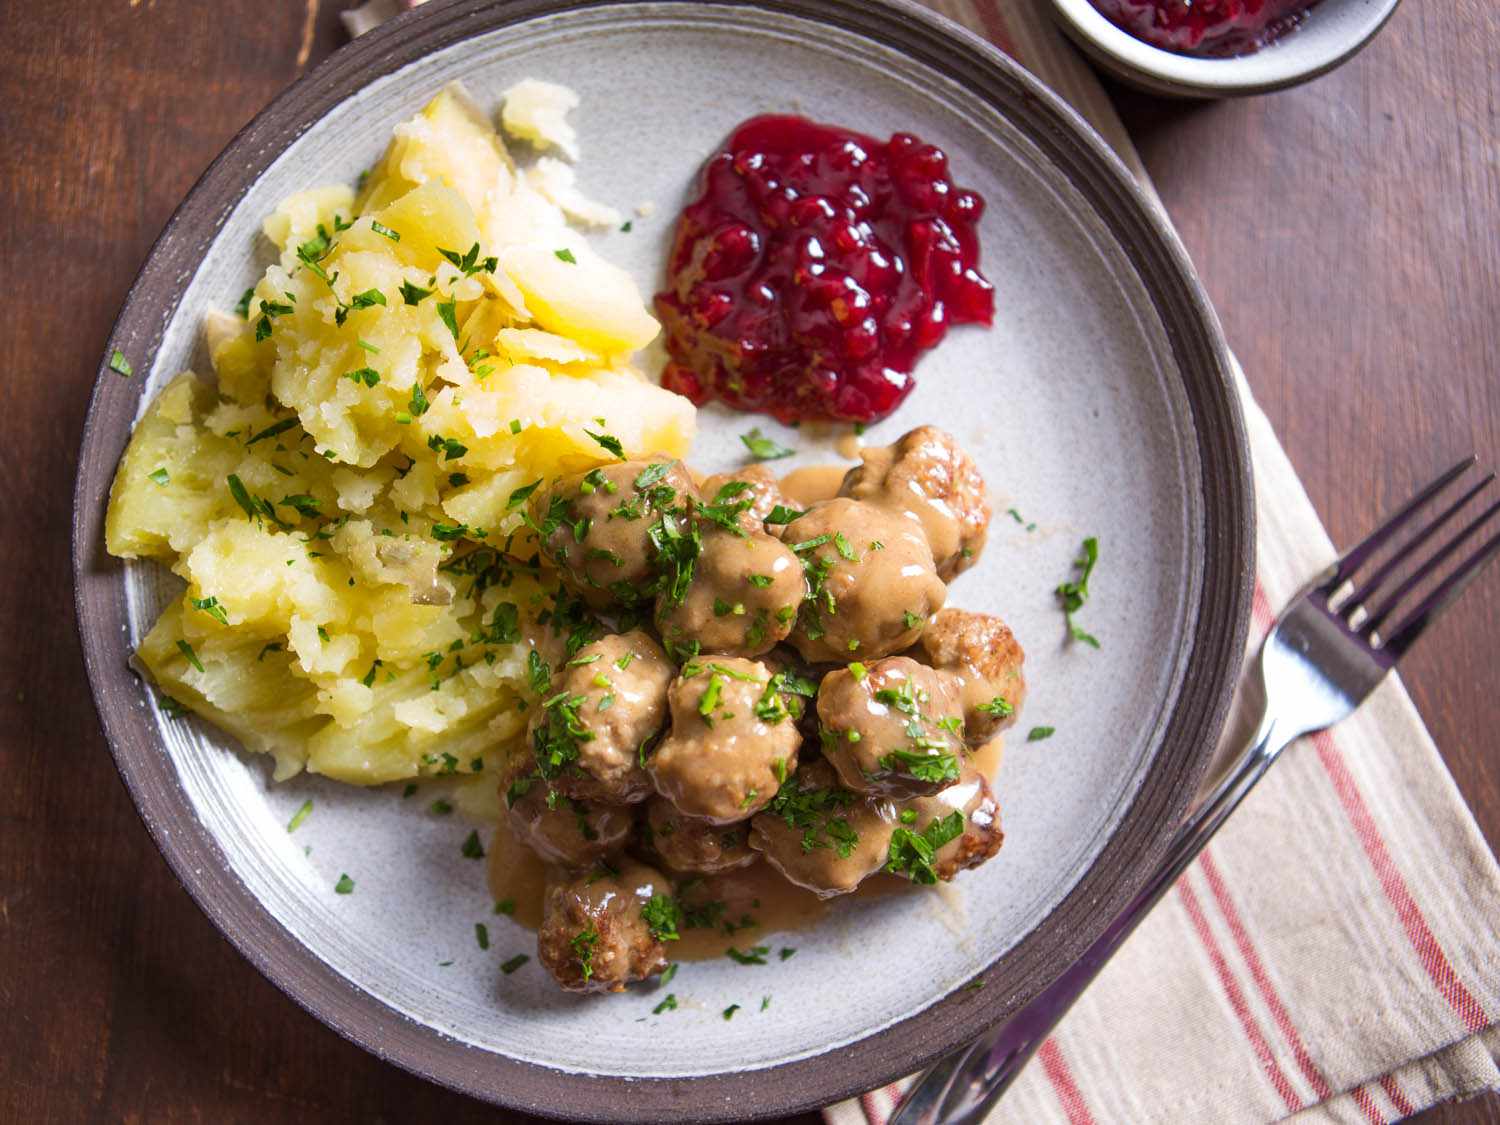 A plate of gravy-covered Swedish meatballs, mashed potatoes, and lingonberry jam.